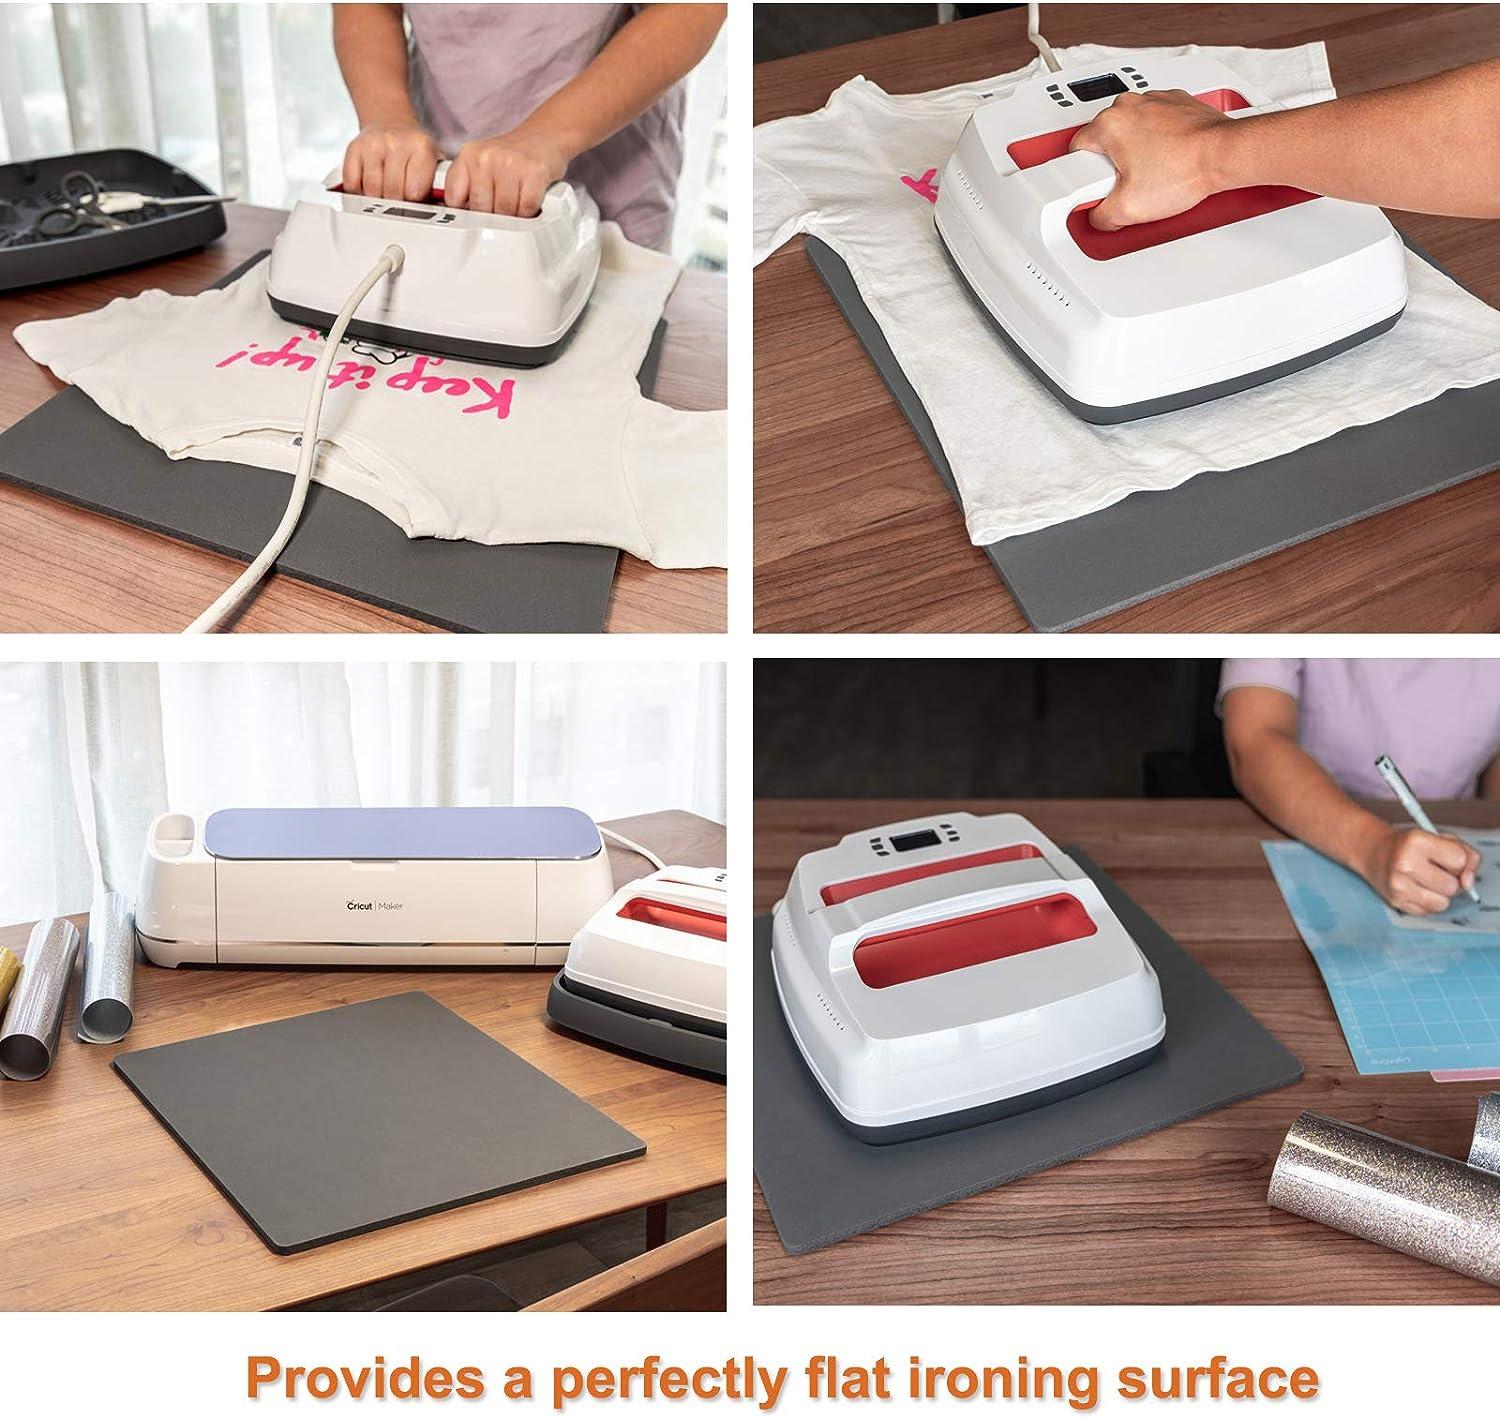 Heat Pressing using Silicone Pads and Plates to avoid Zippers